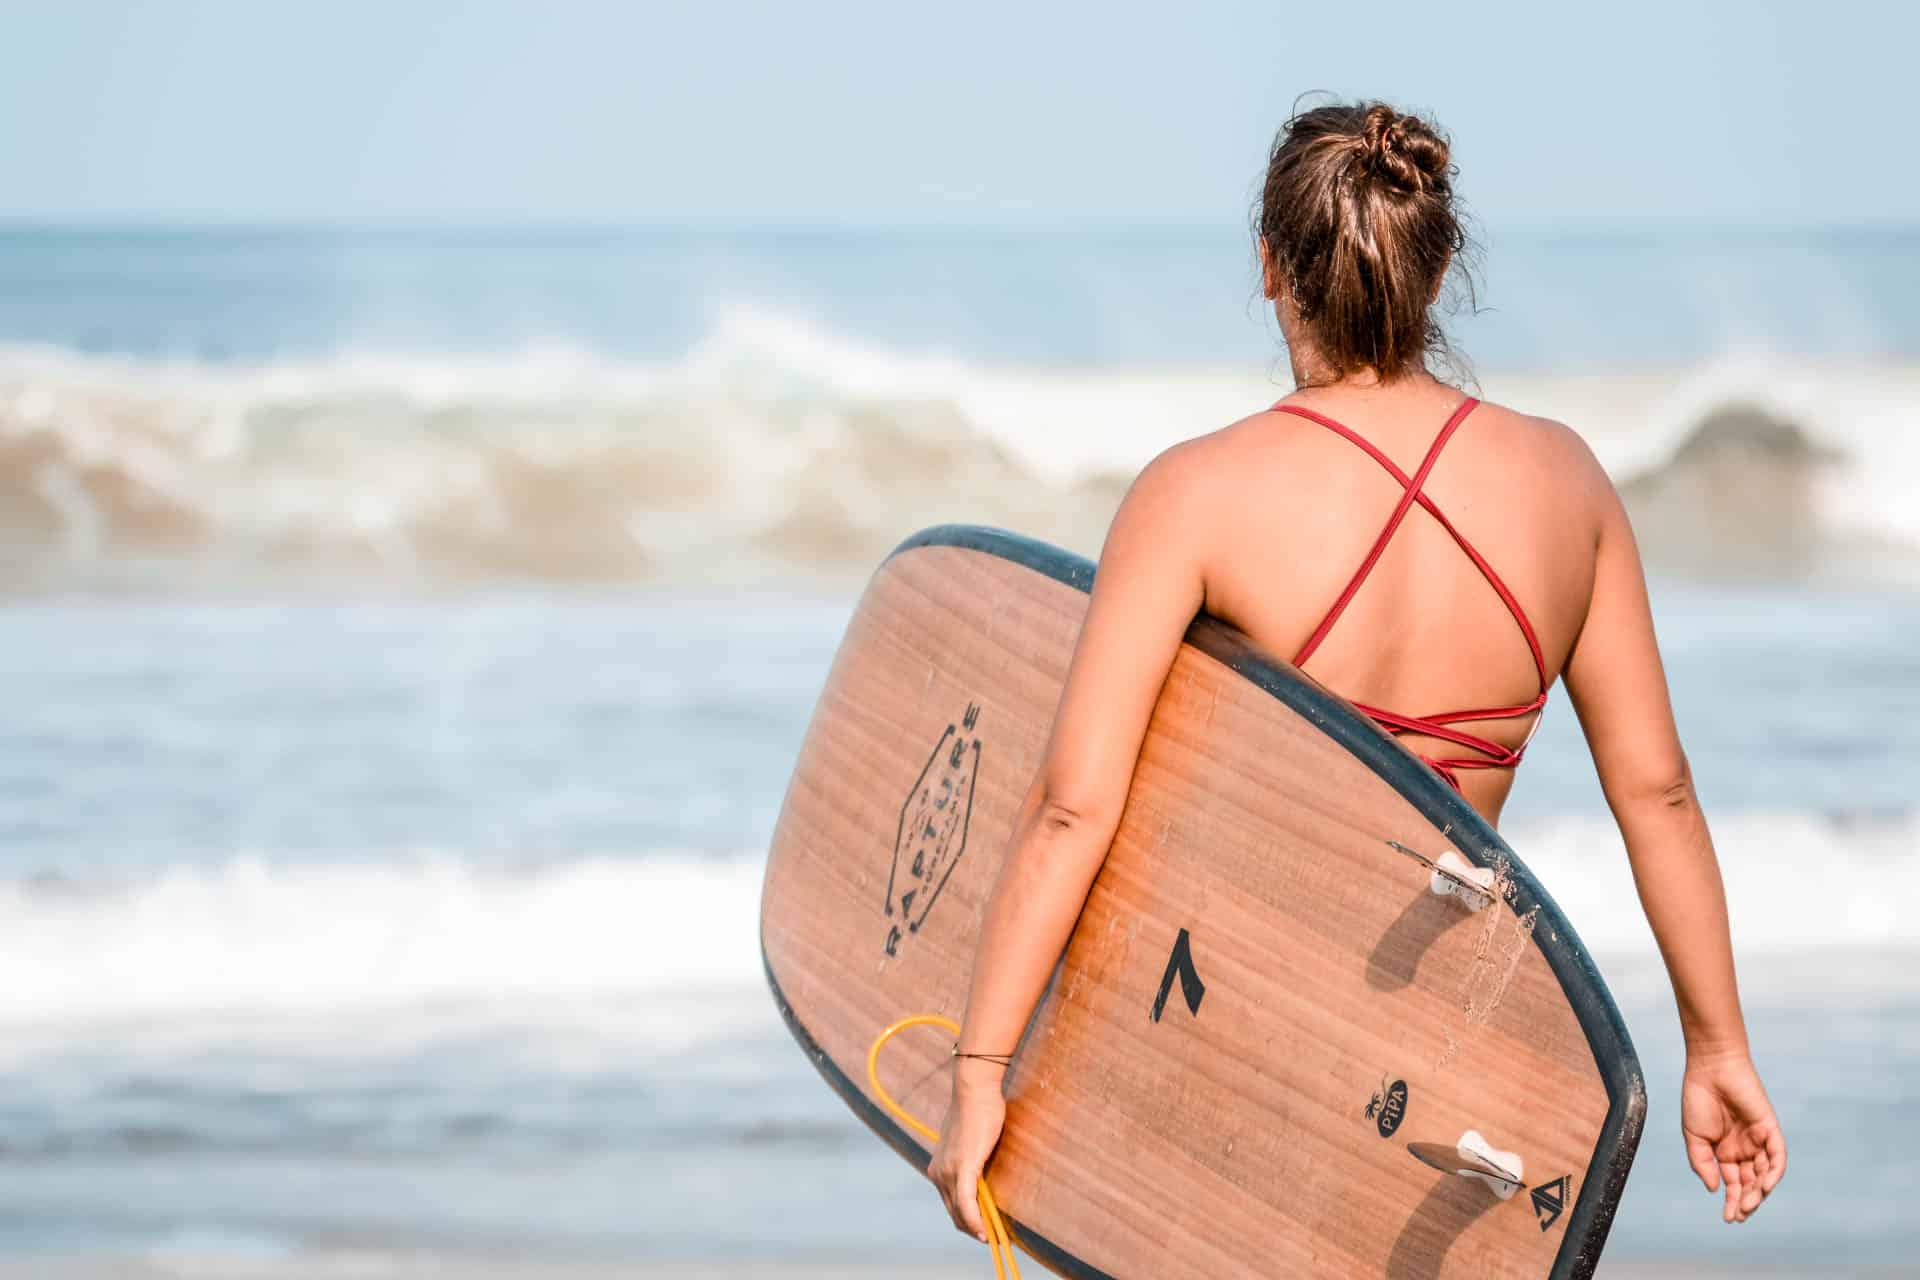 A girl in orange bikini looking at the ocean with a brown surfboard in arm.